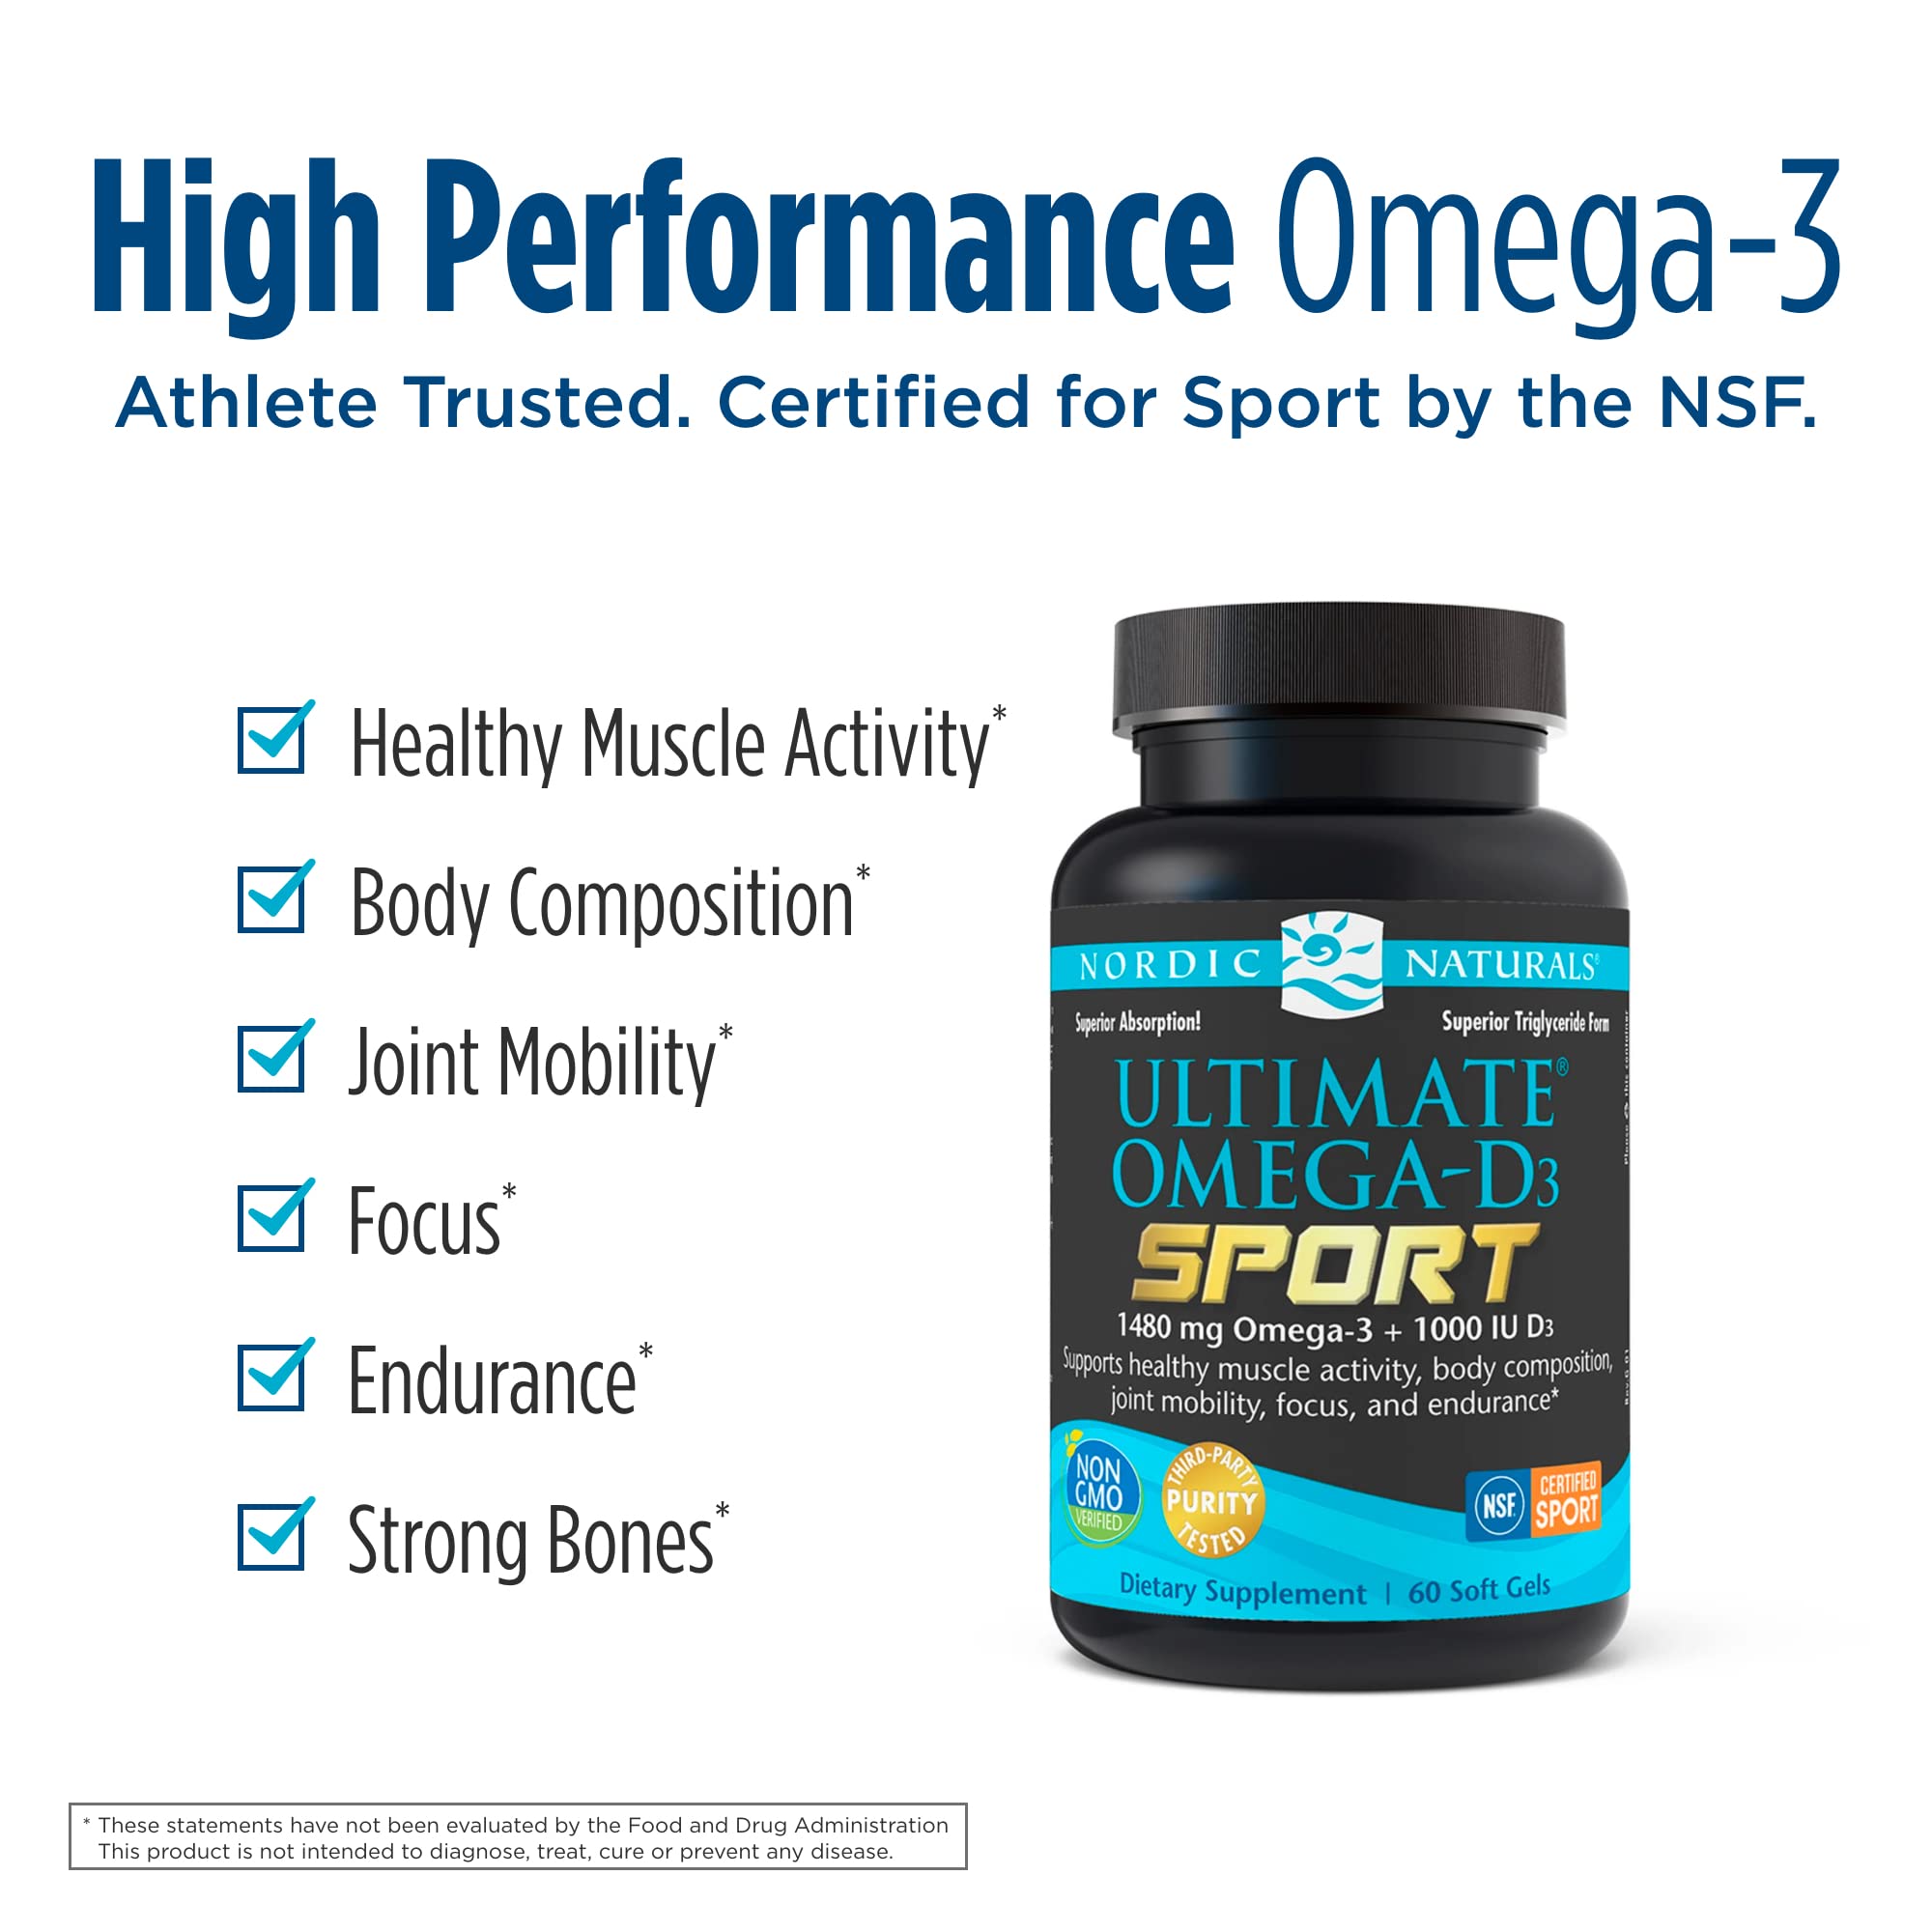 Nordic Naturals - Ultimate Omega-D3 Sport, Supports Healthy Bones and Immunity, 60 Soft Gels